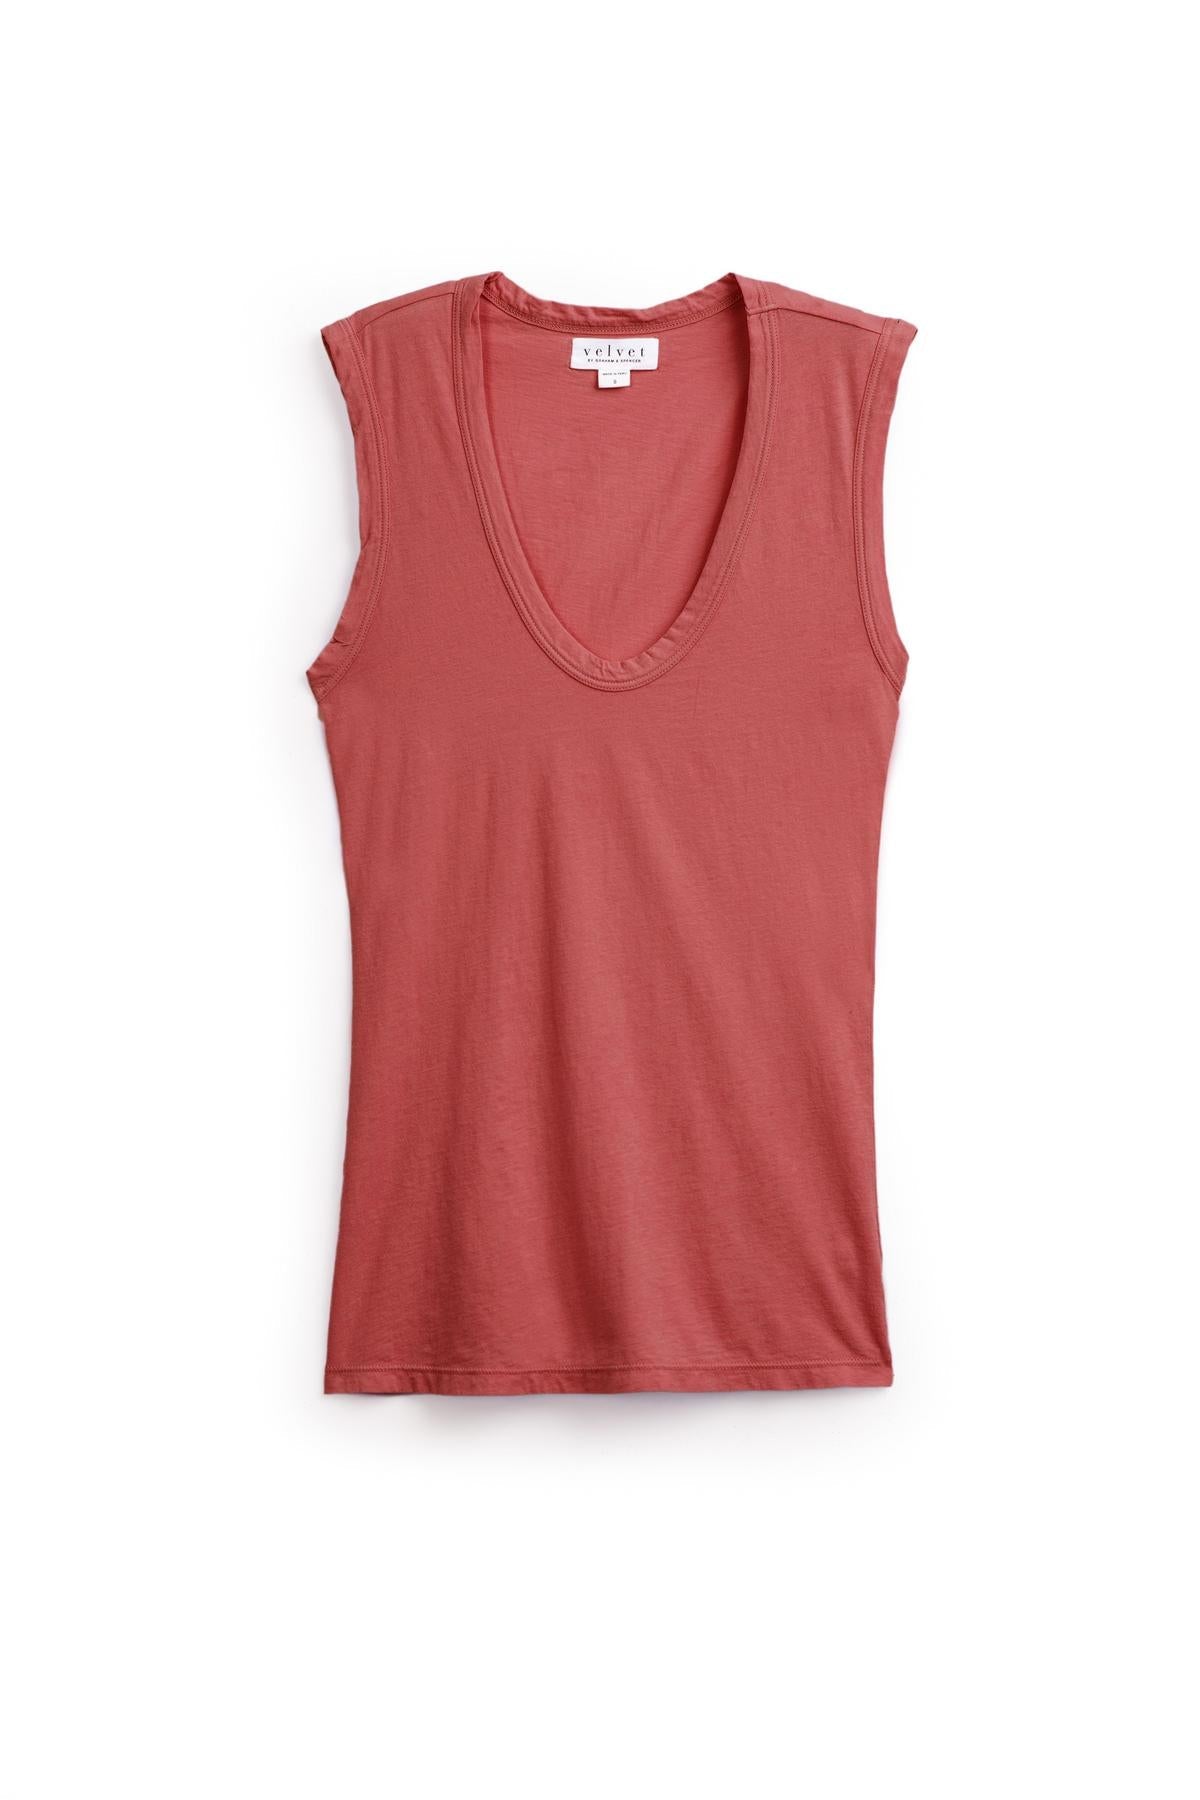   A women's ESTINA GAUZY WHISPER FITTED TANK TOP in red, by Velvet by Graham & Spencer. 